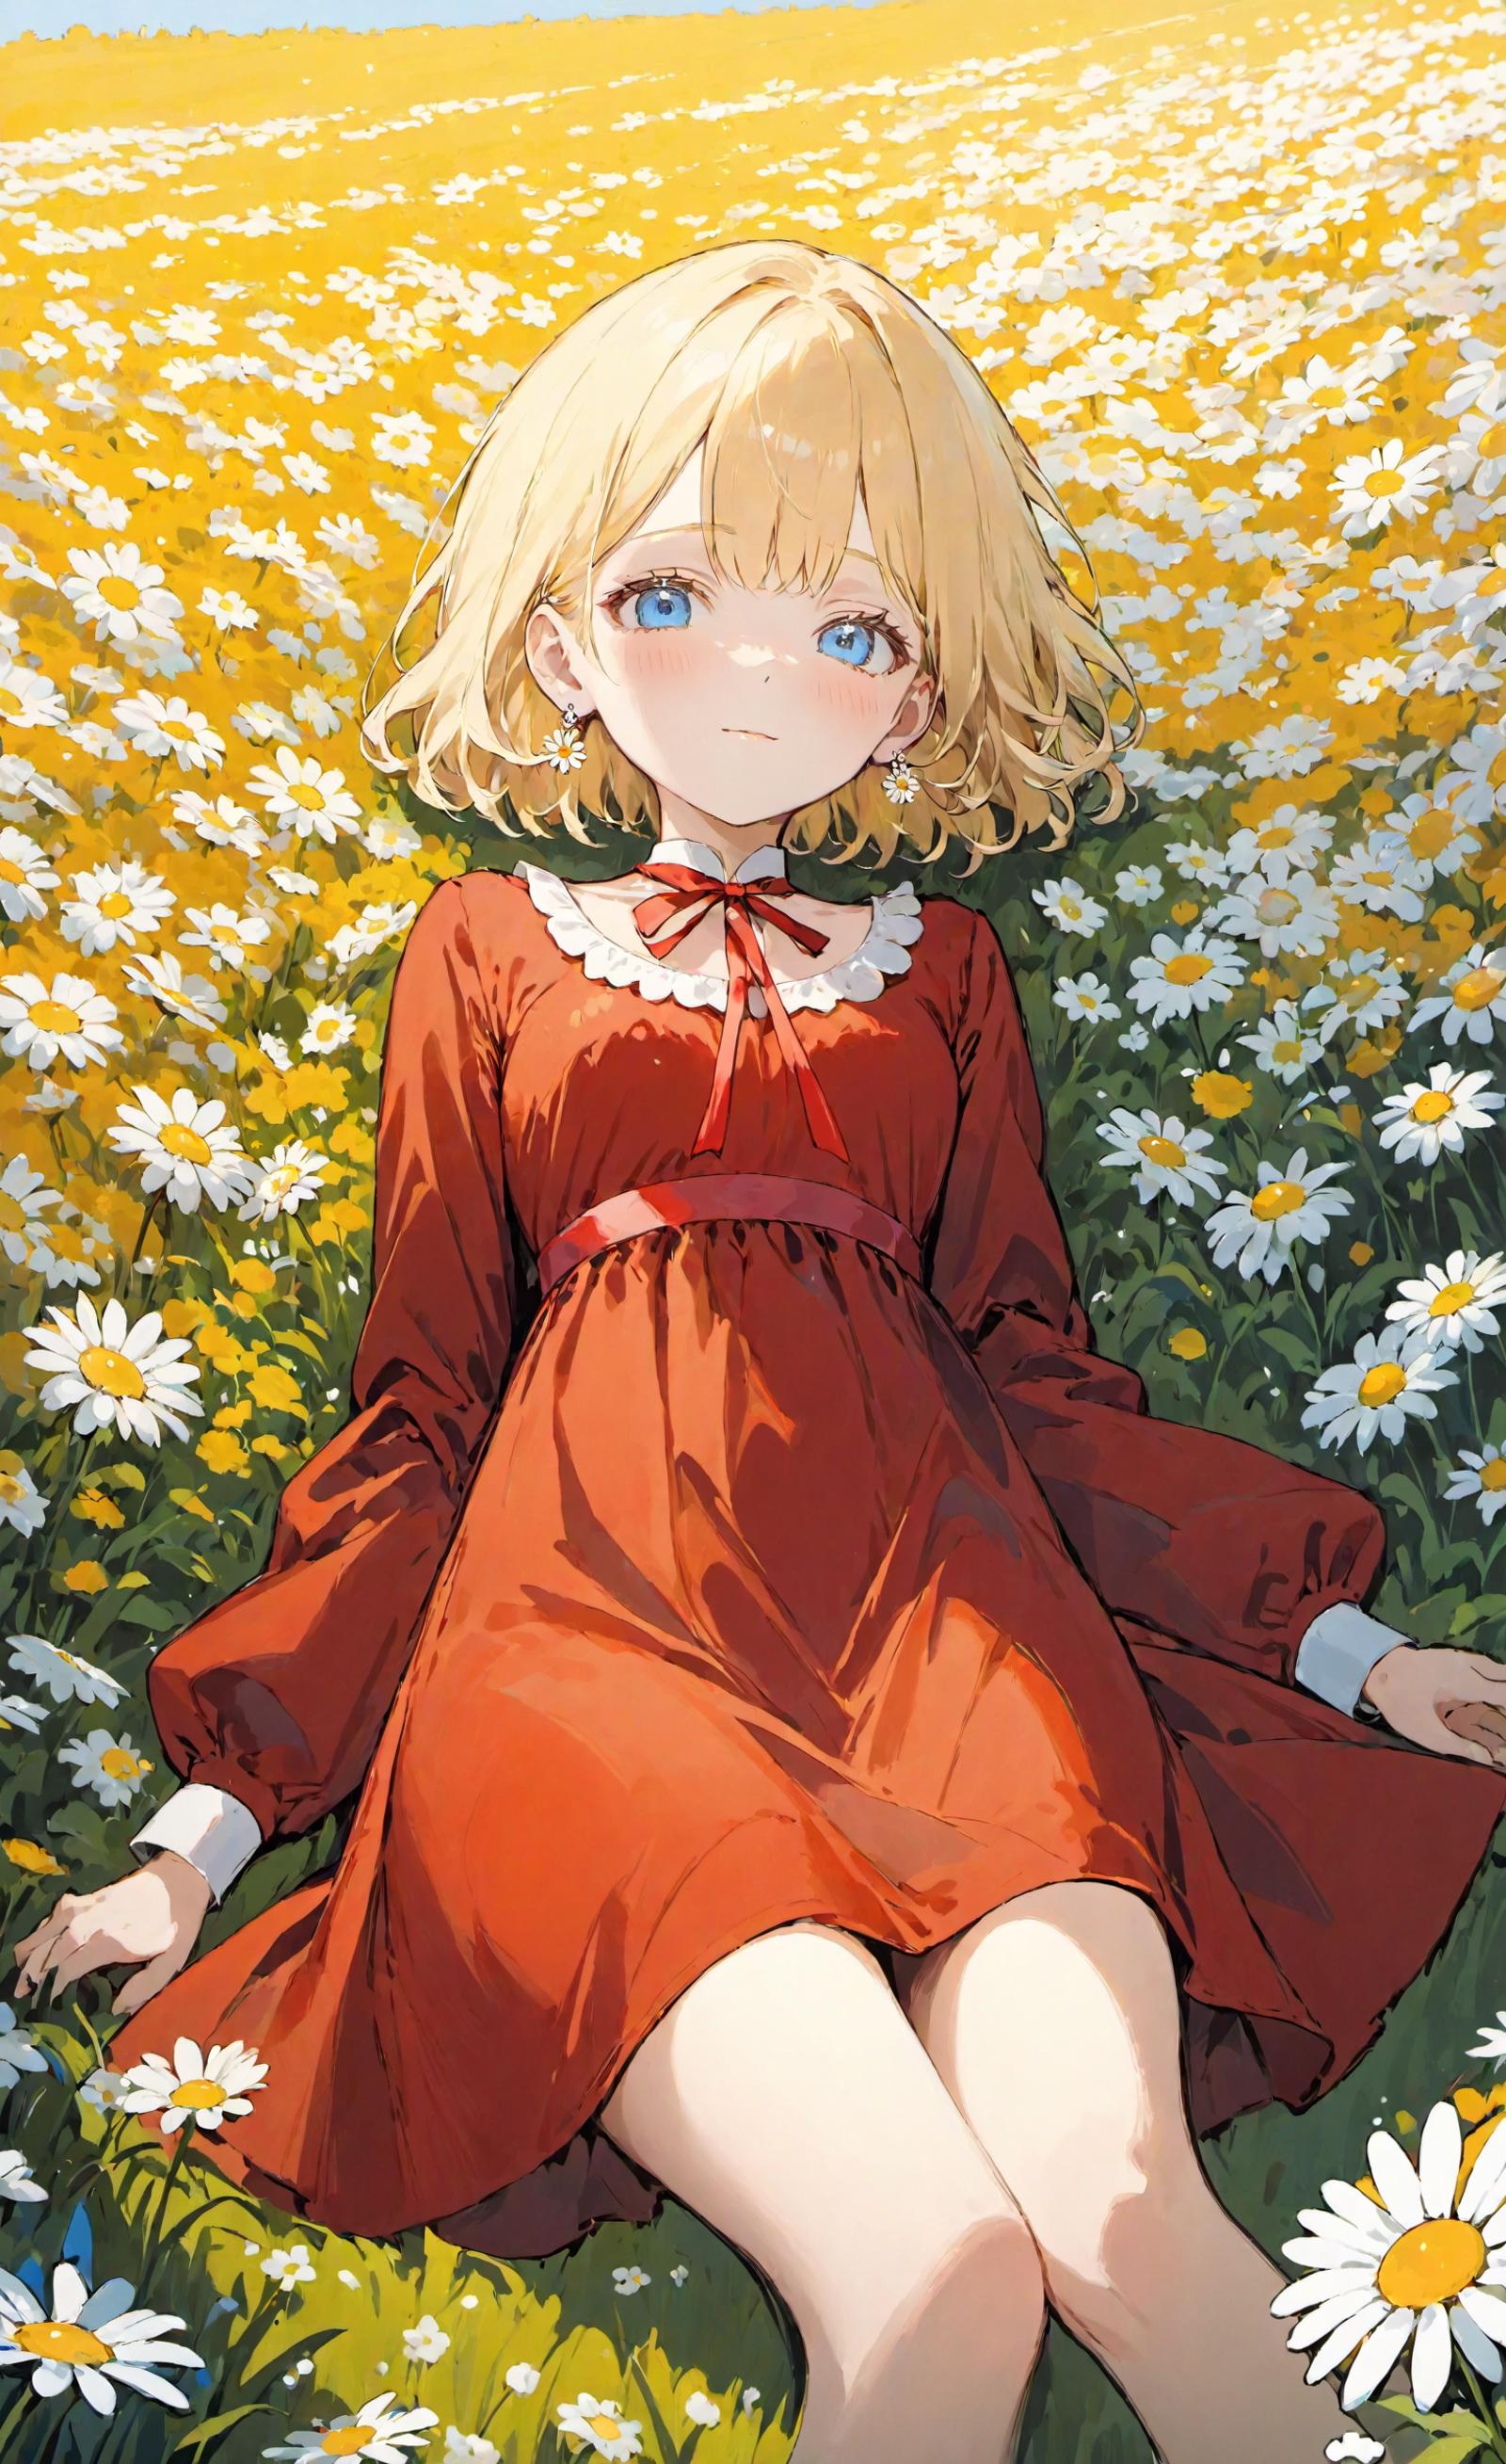 A cartoon girl in a red dress lying on the grass.